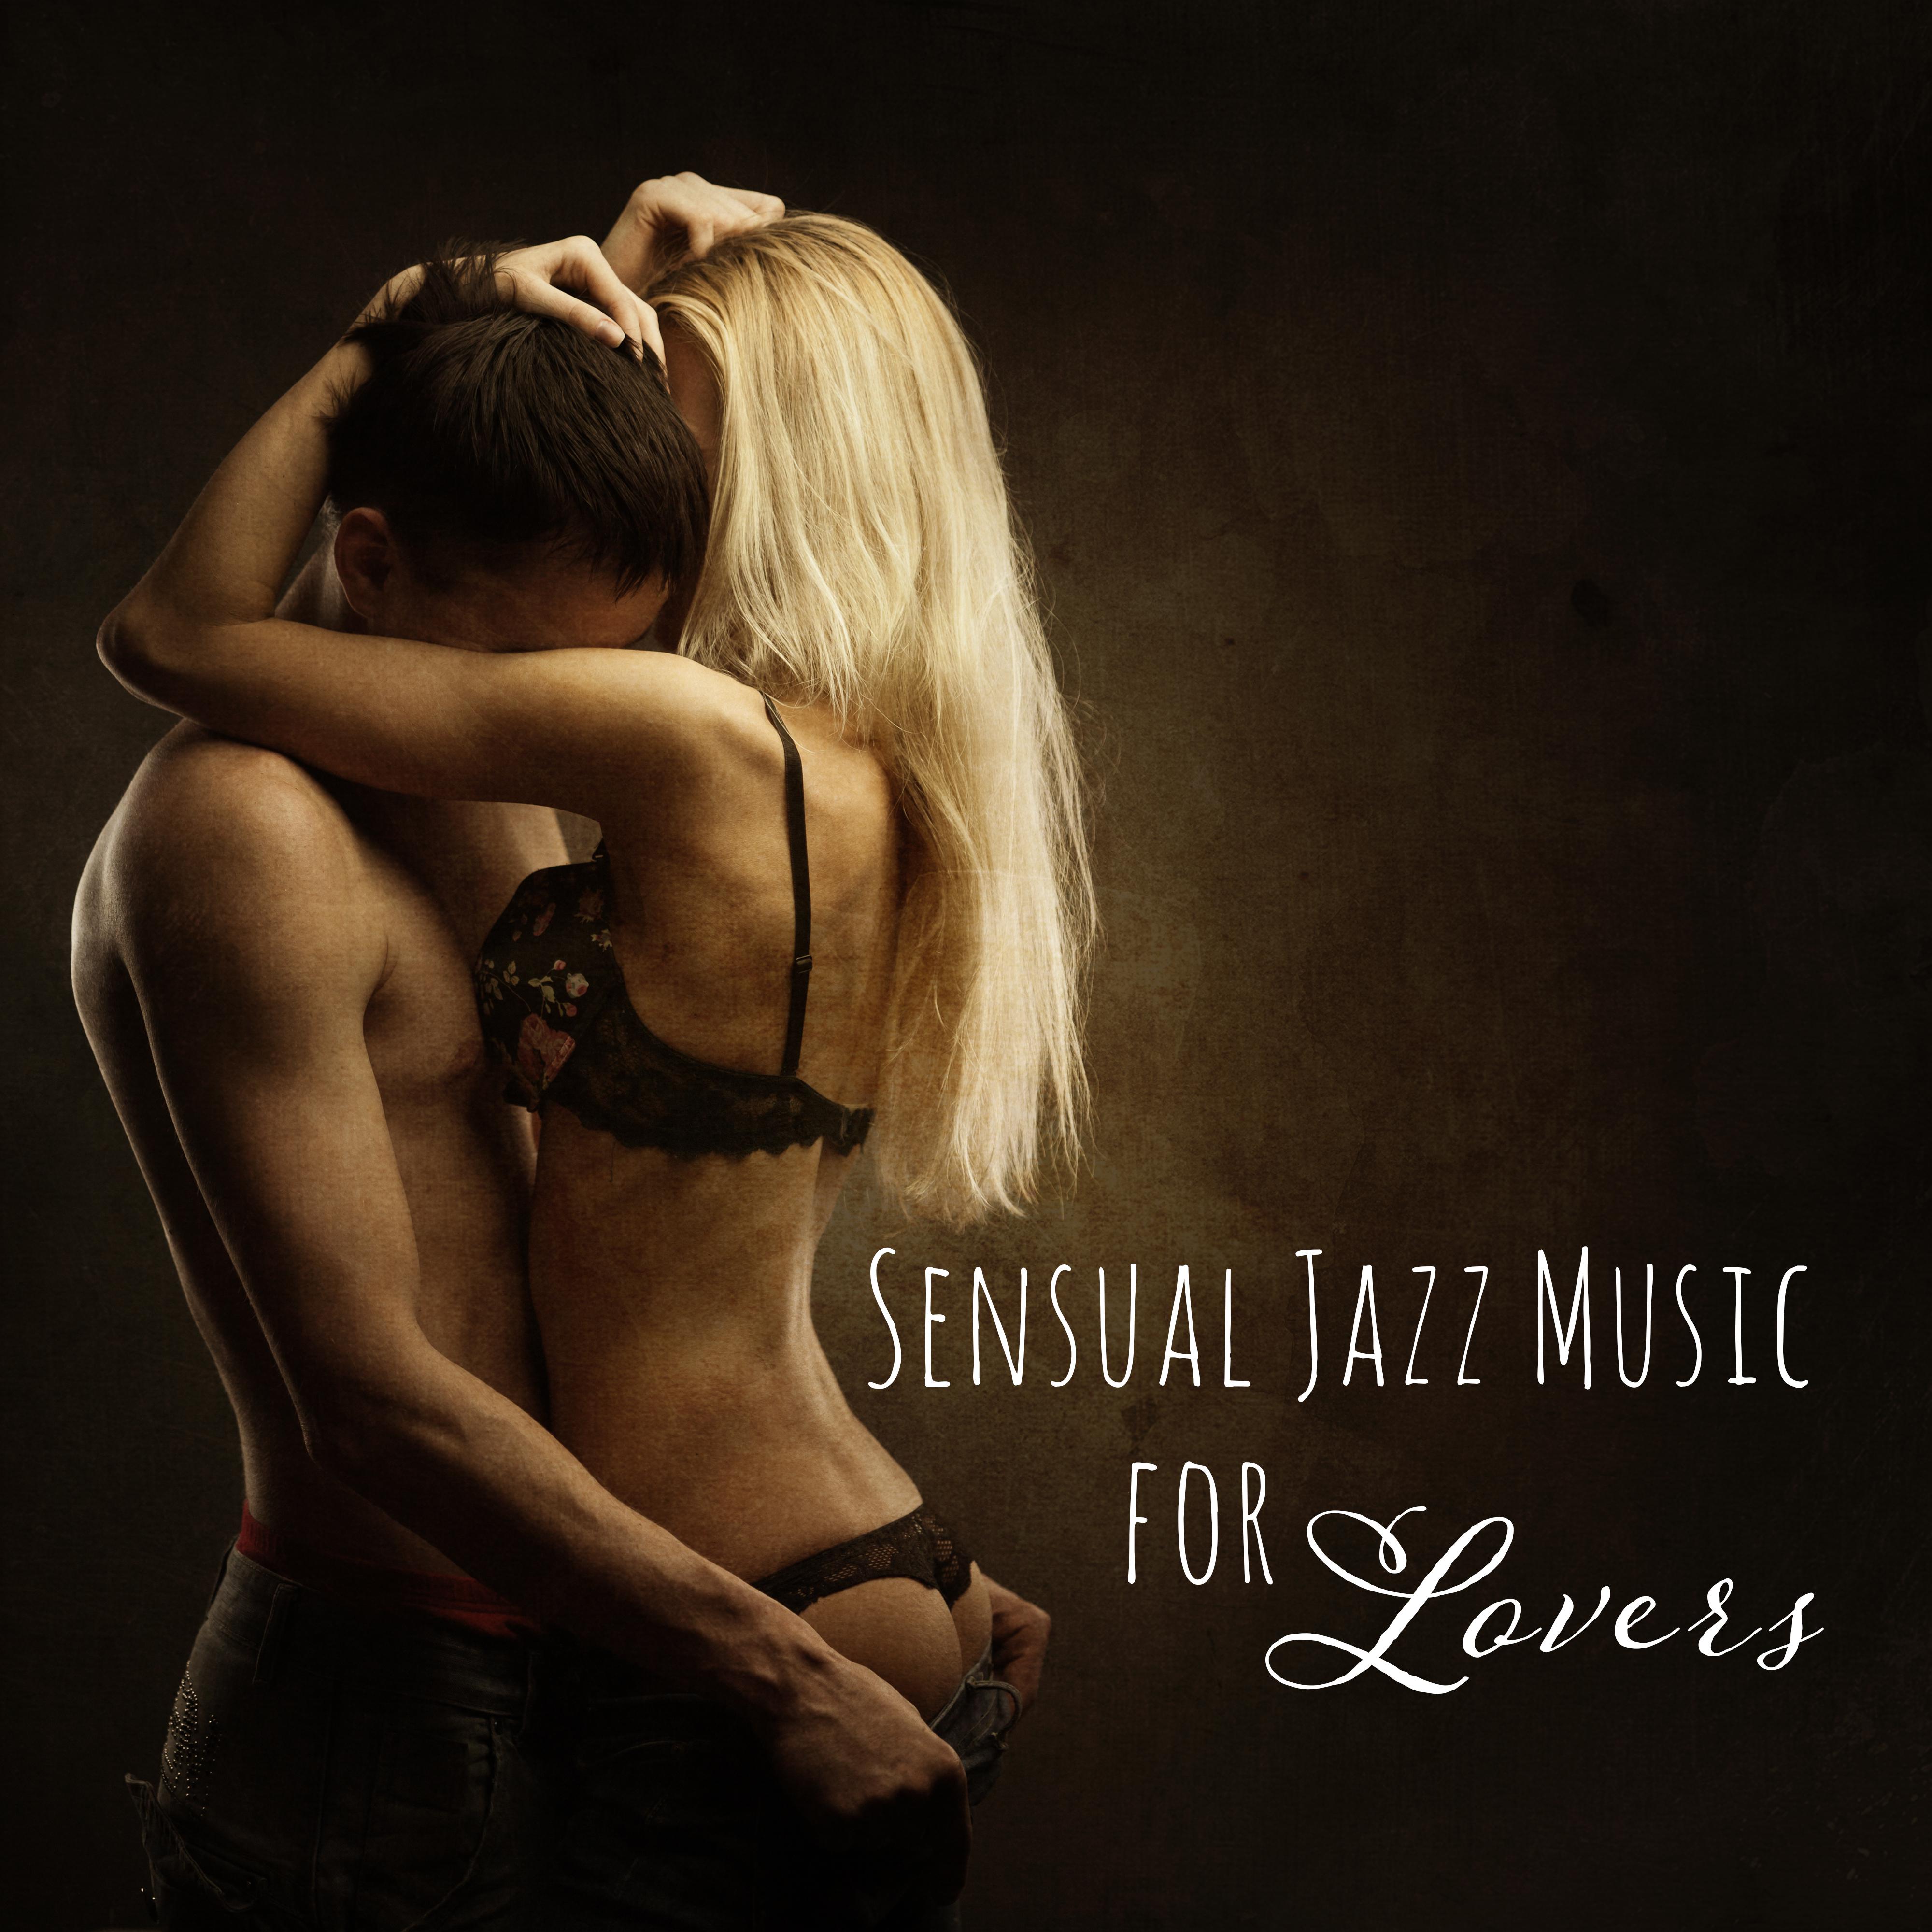 Sensual Jazz Music for Lovers